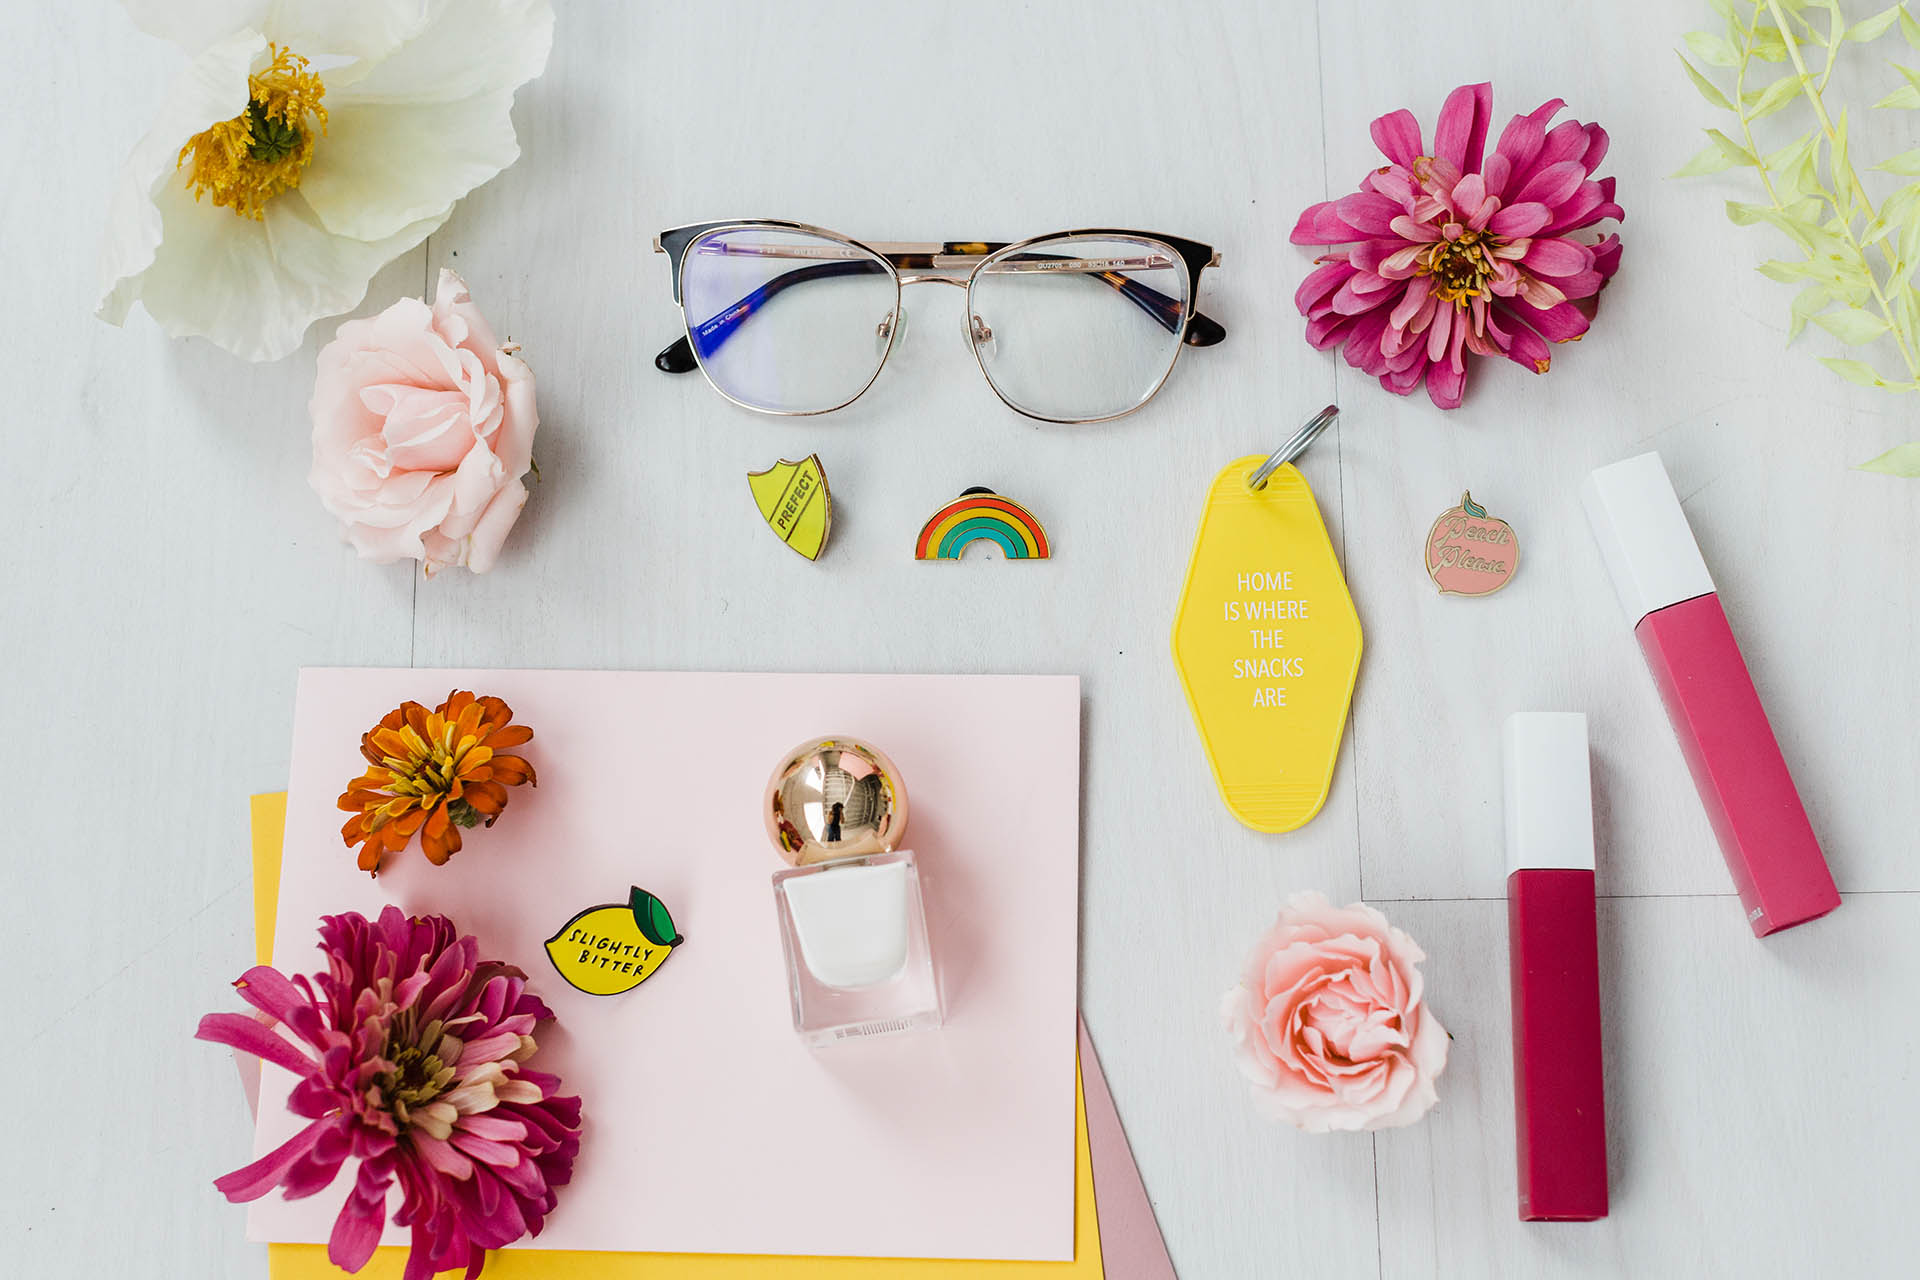 Flat lay photography; a detail photo of a flat lay of flowers, glasses, pins, cards, nail polish, and more all on a white, wooden floor